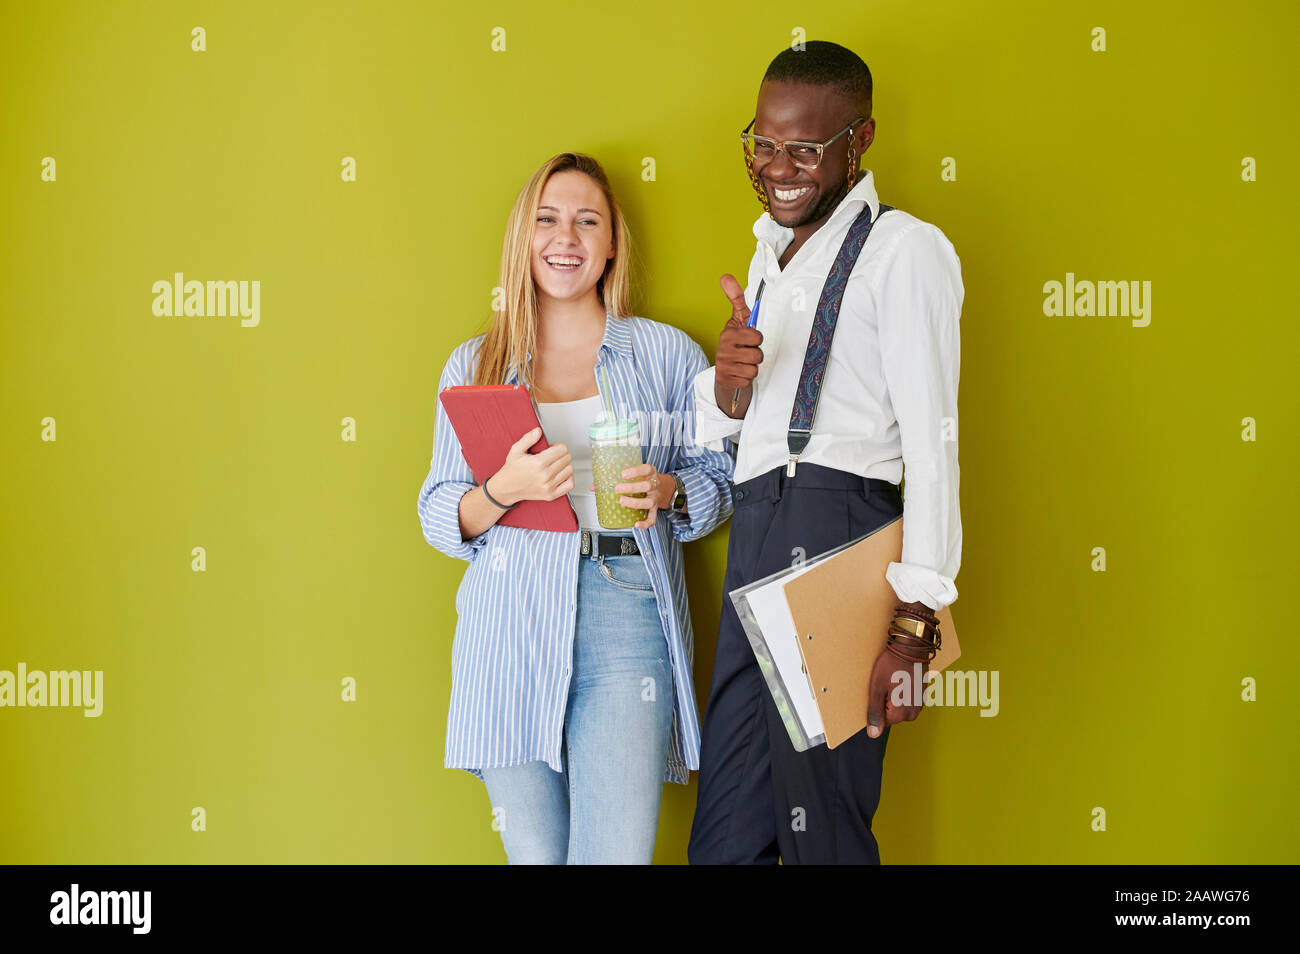 Portrait of happy casual colleagues standing together in front of a green wall Stock Photo